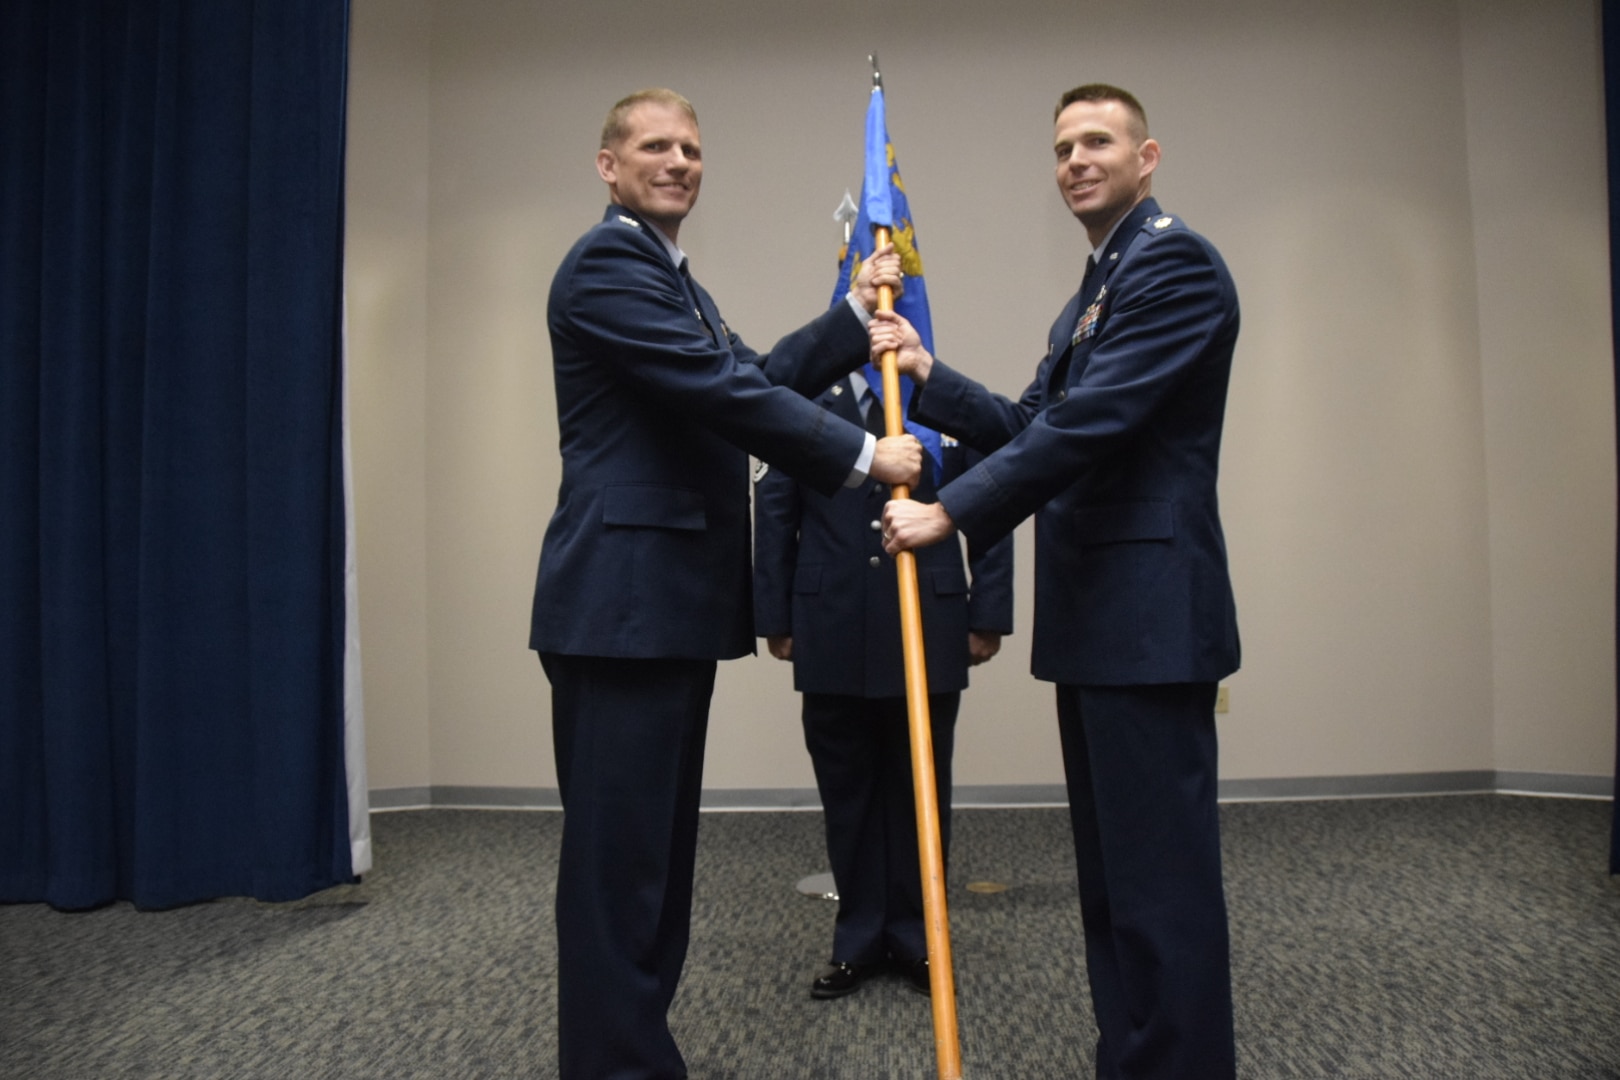 Col. David W. Enfield Jr., left, 433rd Mission Support Group commander, presents the 433rd Civil Engineer Squadron guidon to Maj. Nathan Leuthold, the squadron's new commander, during the unit change of command ceremony April 2, 2017 at Joint Base San Antonio-Lackland, Texas.
(U.S. Air Force photo by Tech. Sgt. Carlos J. Trevino)